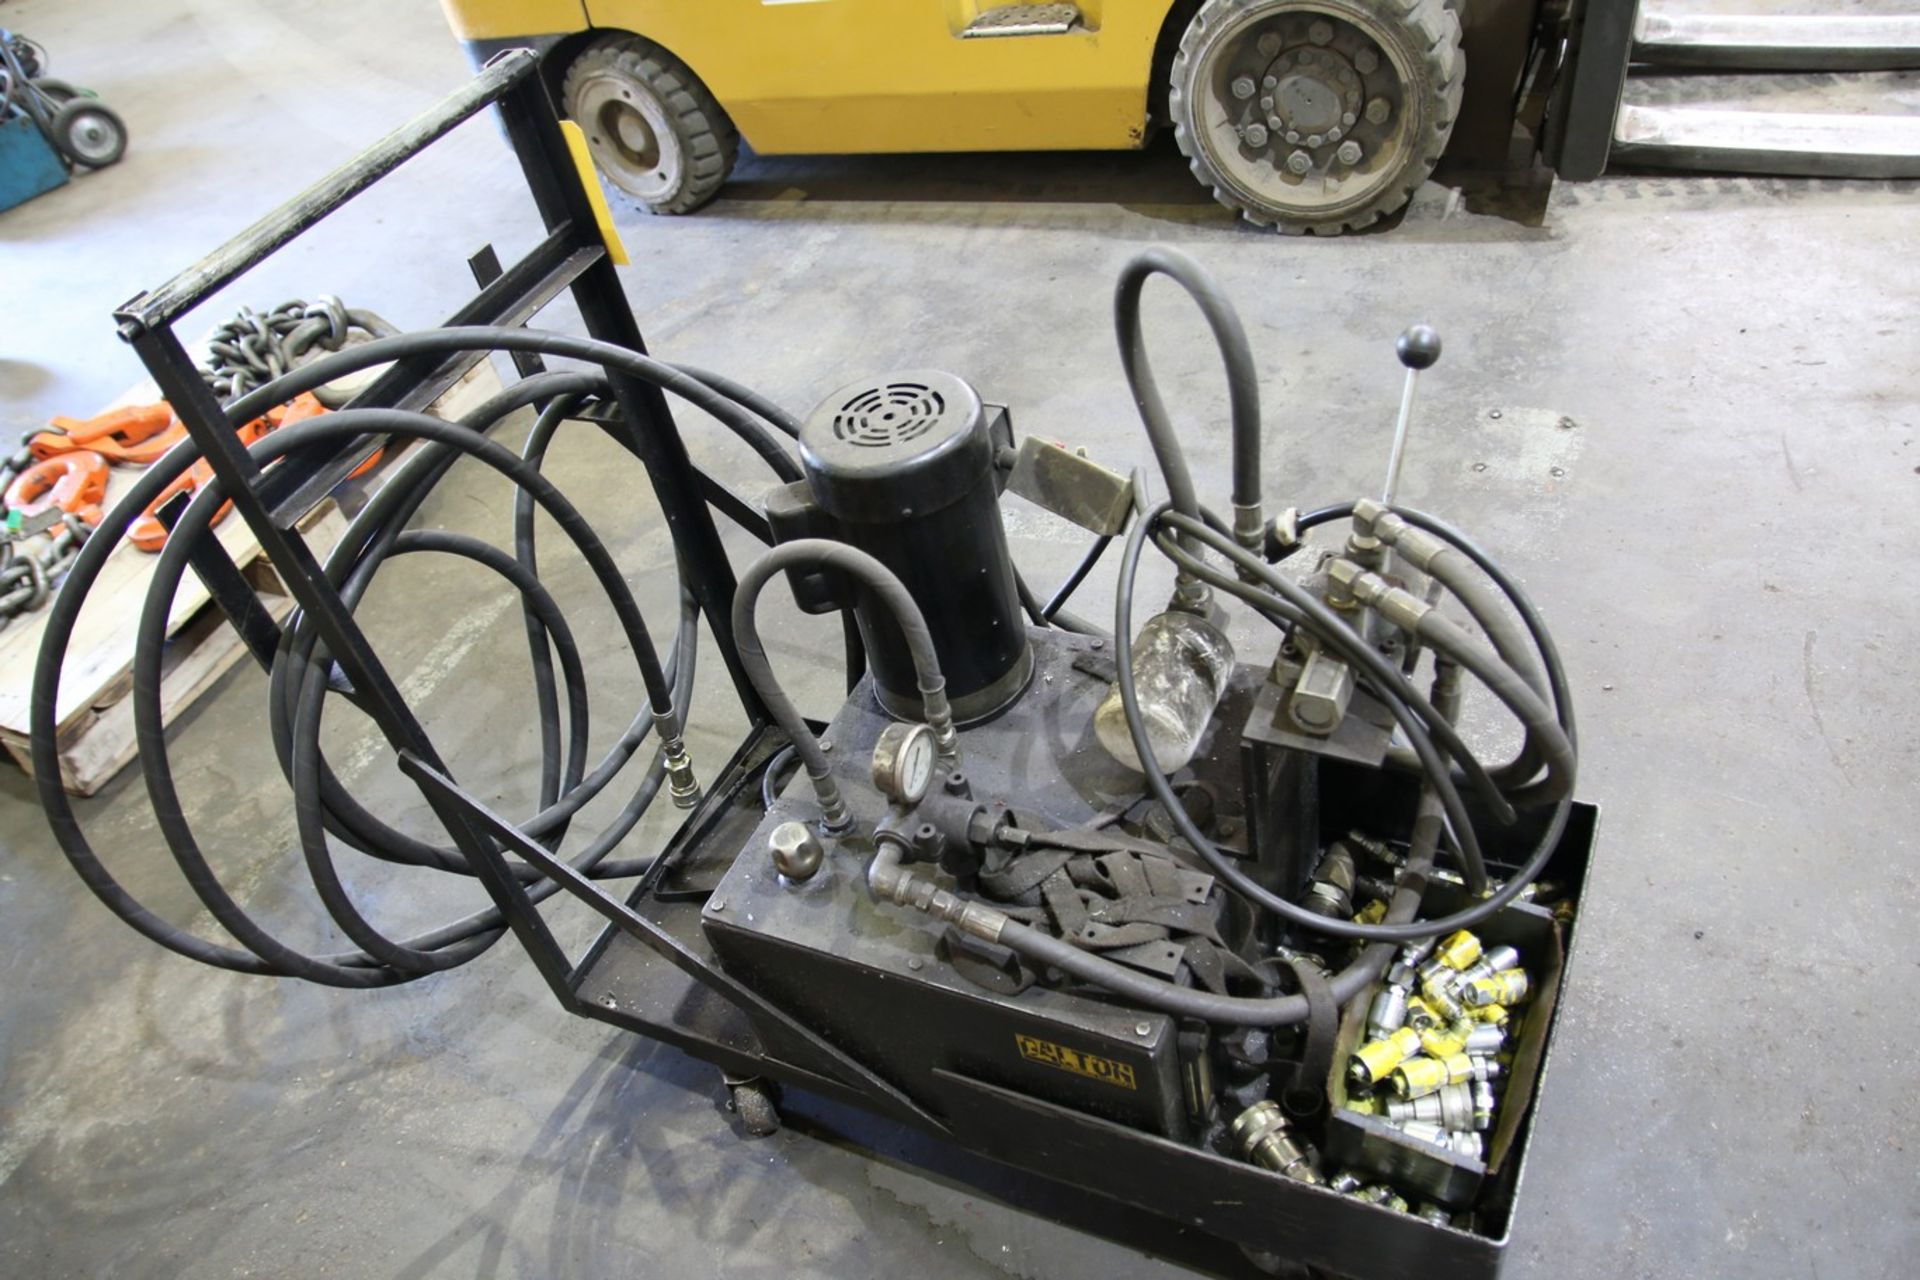 Dalton Dalton Hydraulic Pump with Cart, Hoses and Various Fittings - Image 2 of 3